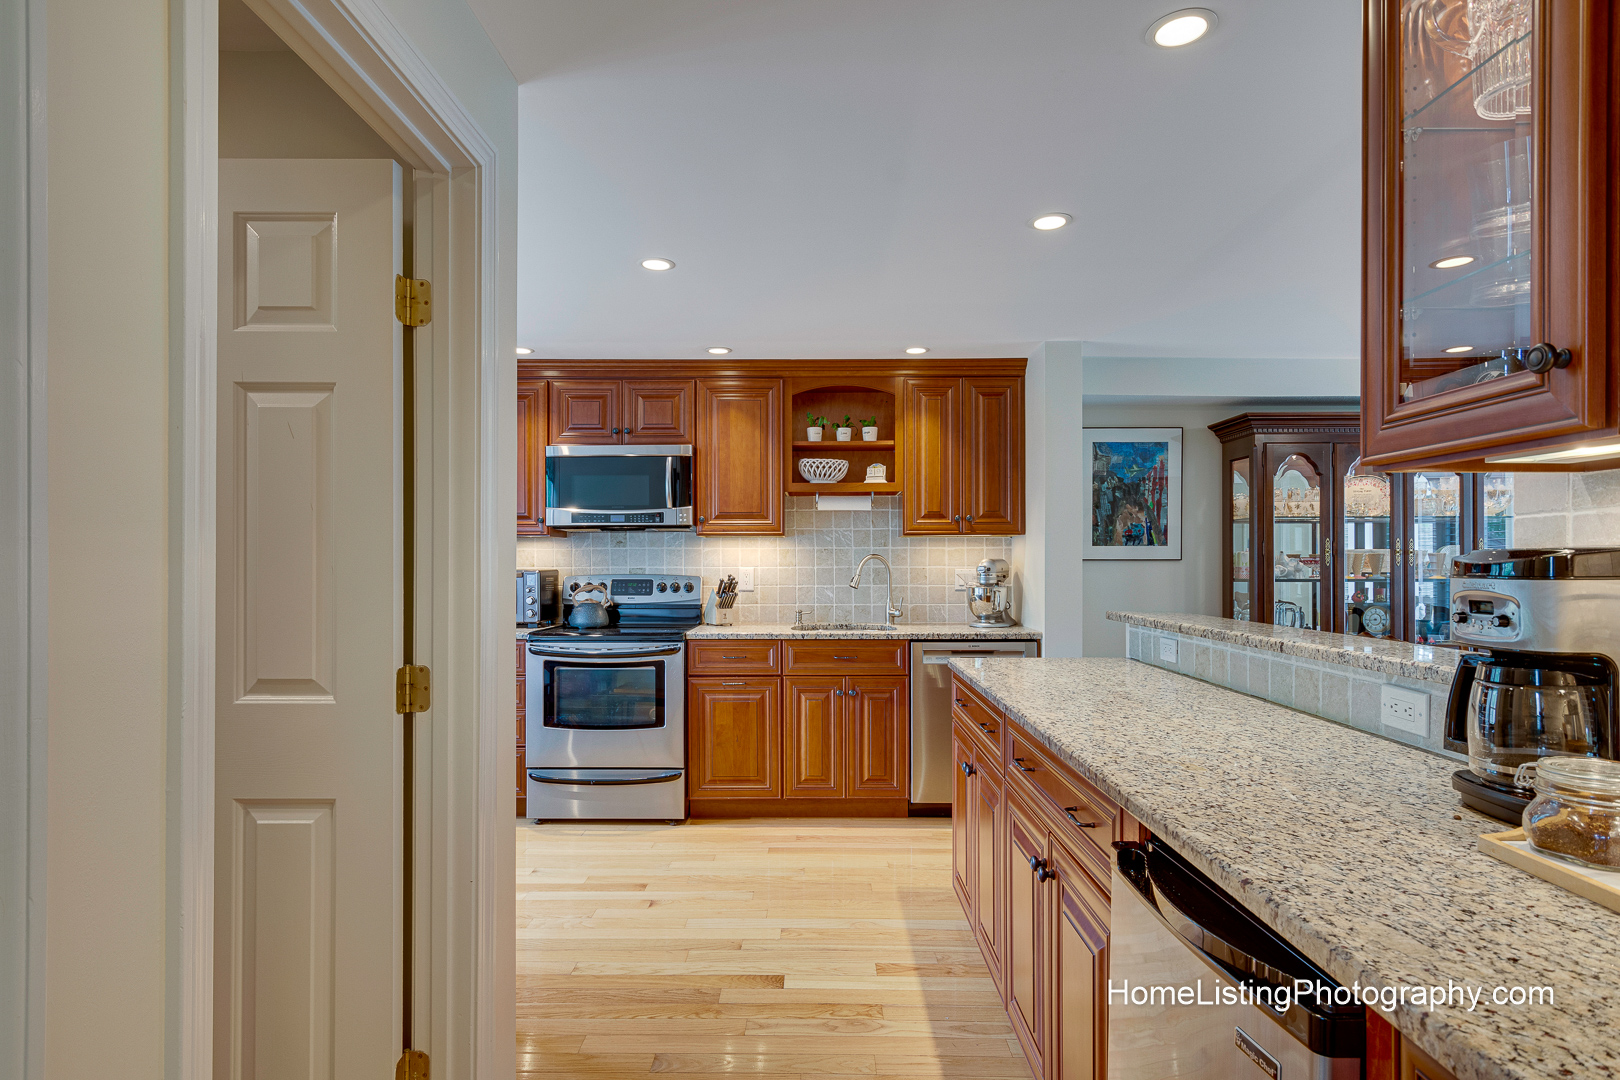 Thomas Adach - North Reading MA professional real estate photographer - 508-655-2225 Home Listing Photography